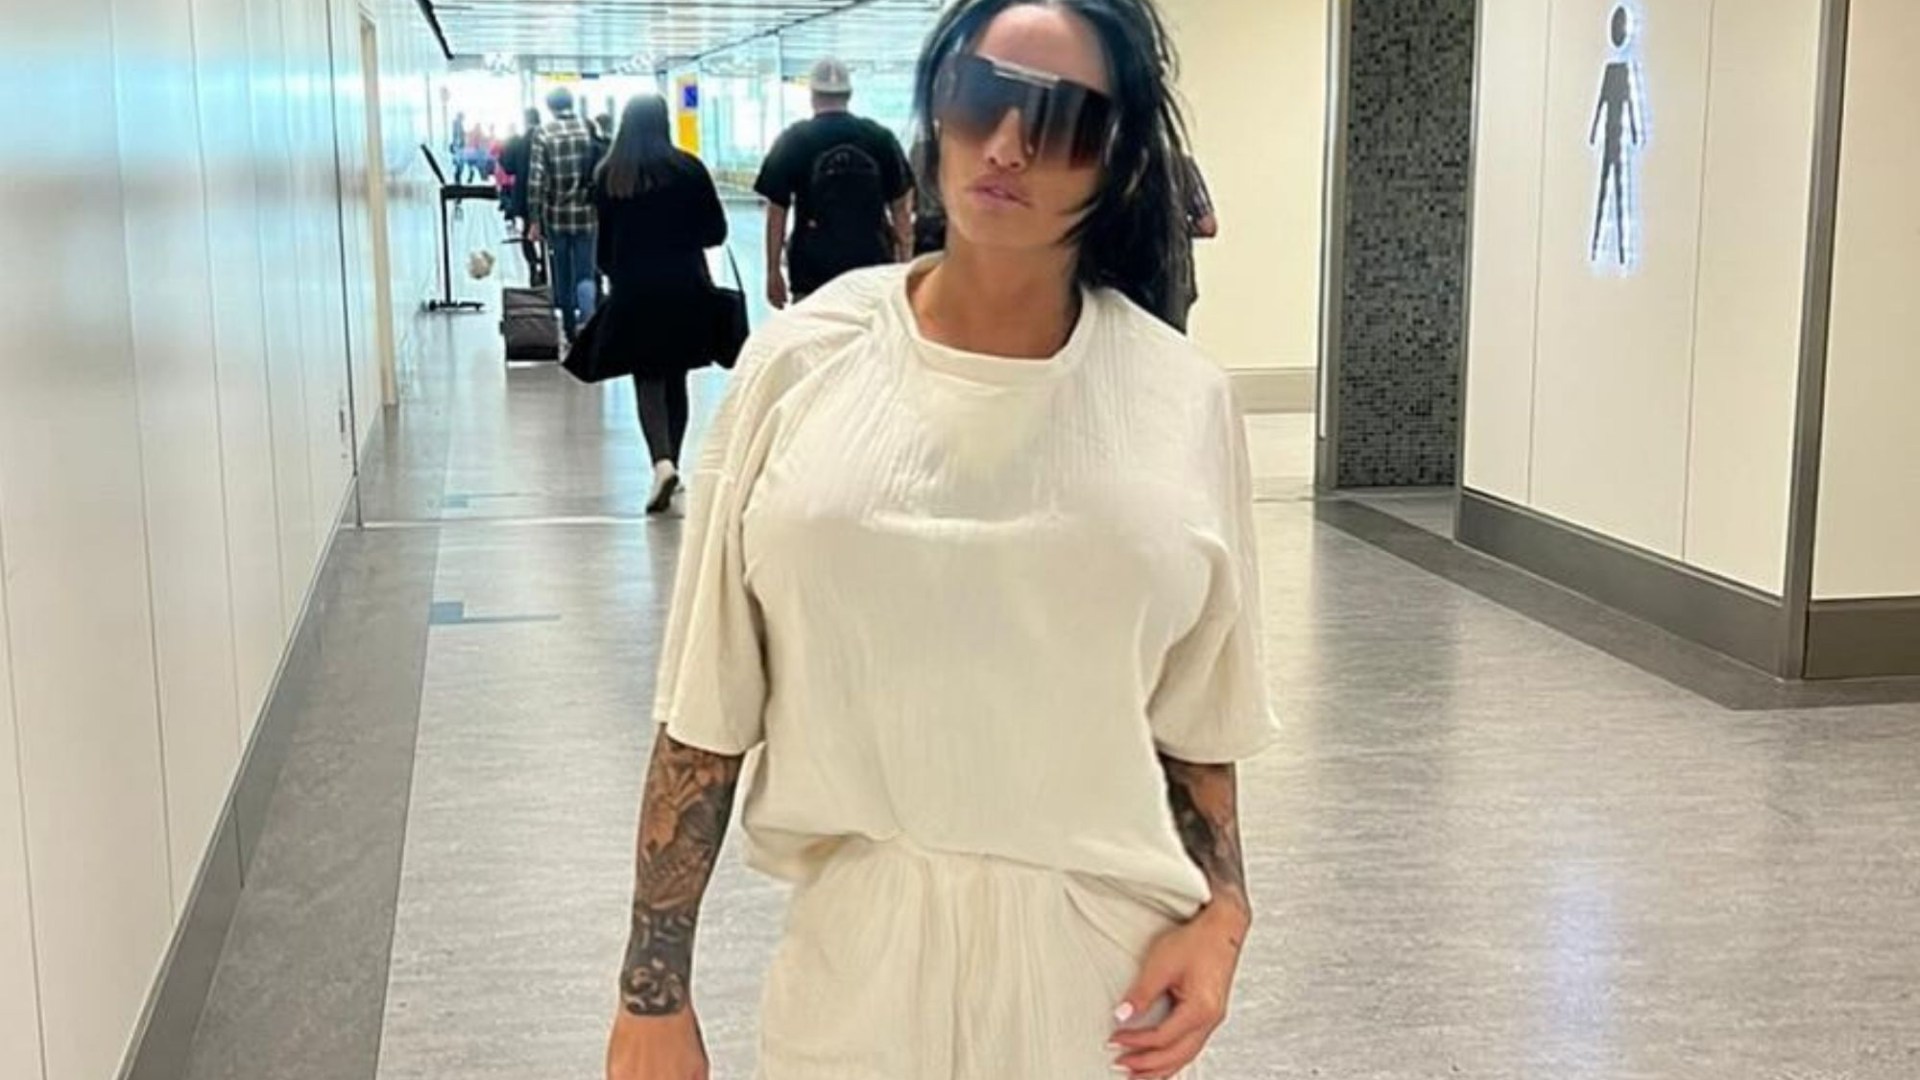 Katie Price shares airport snap as she jets to Dublin Pride on daughter Princess’s birthday 3 days after 17th boob job [Video]